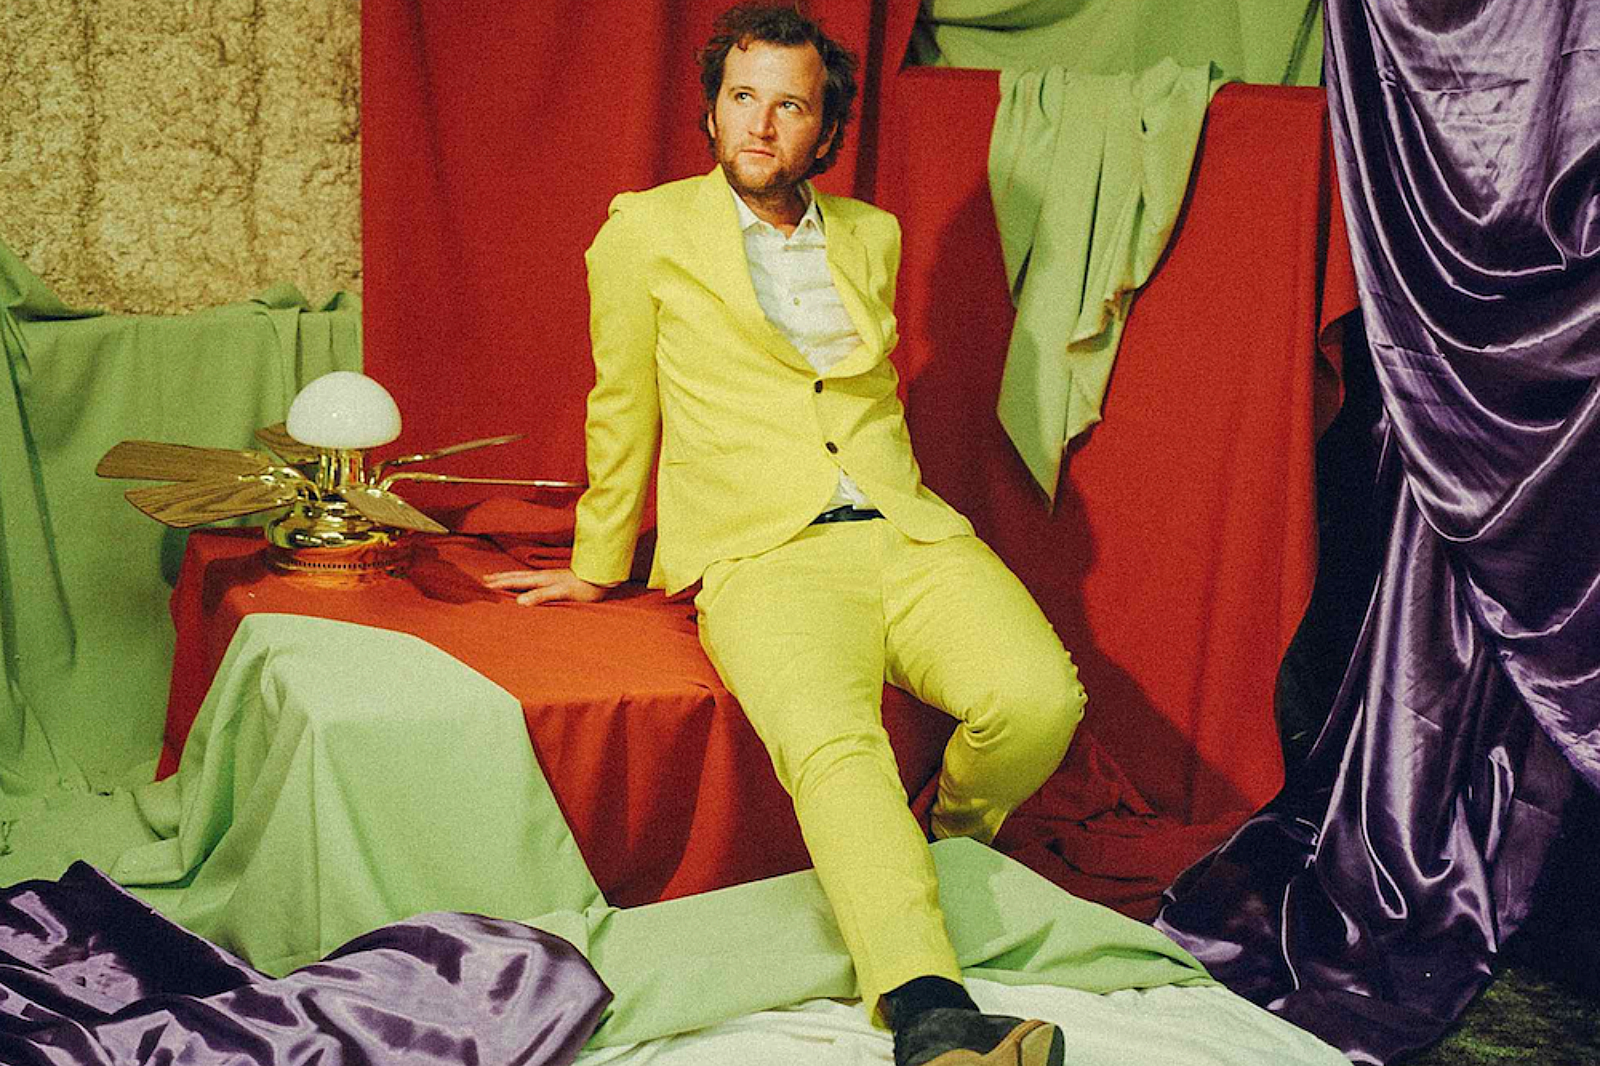 Baio shares new tracks 'Dead Hand Control' and 'Take It From Me'